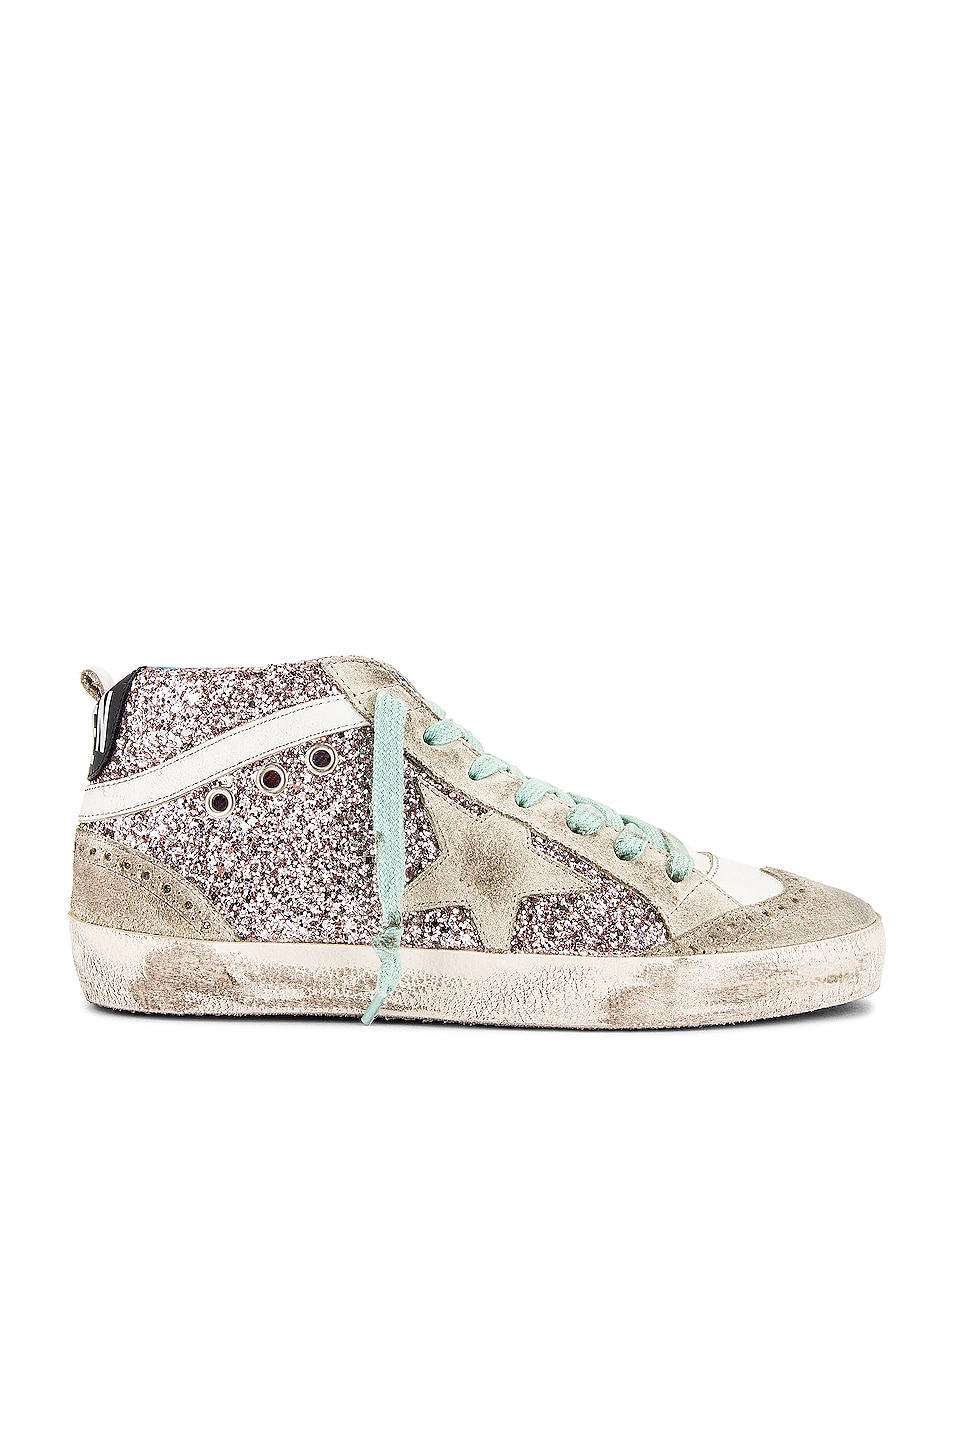 Image 1 of Golden Goose Mid Star Sneaker in Pink, Ice, White, Night Blue, & Multicolor